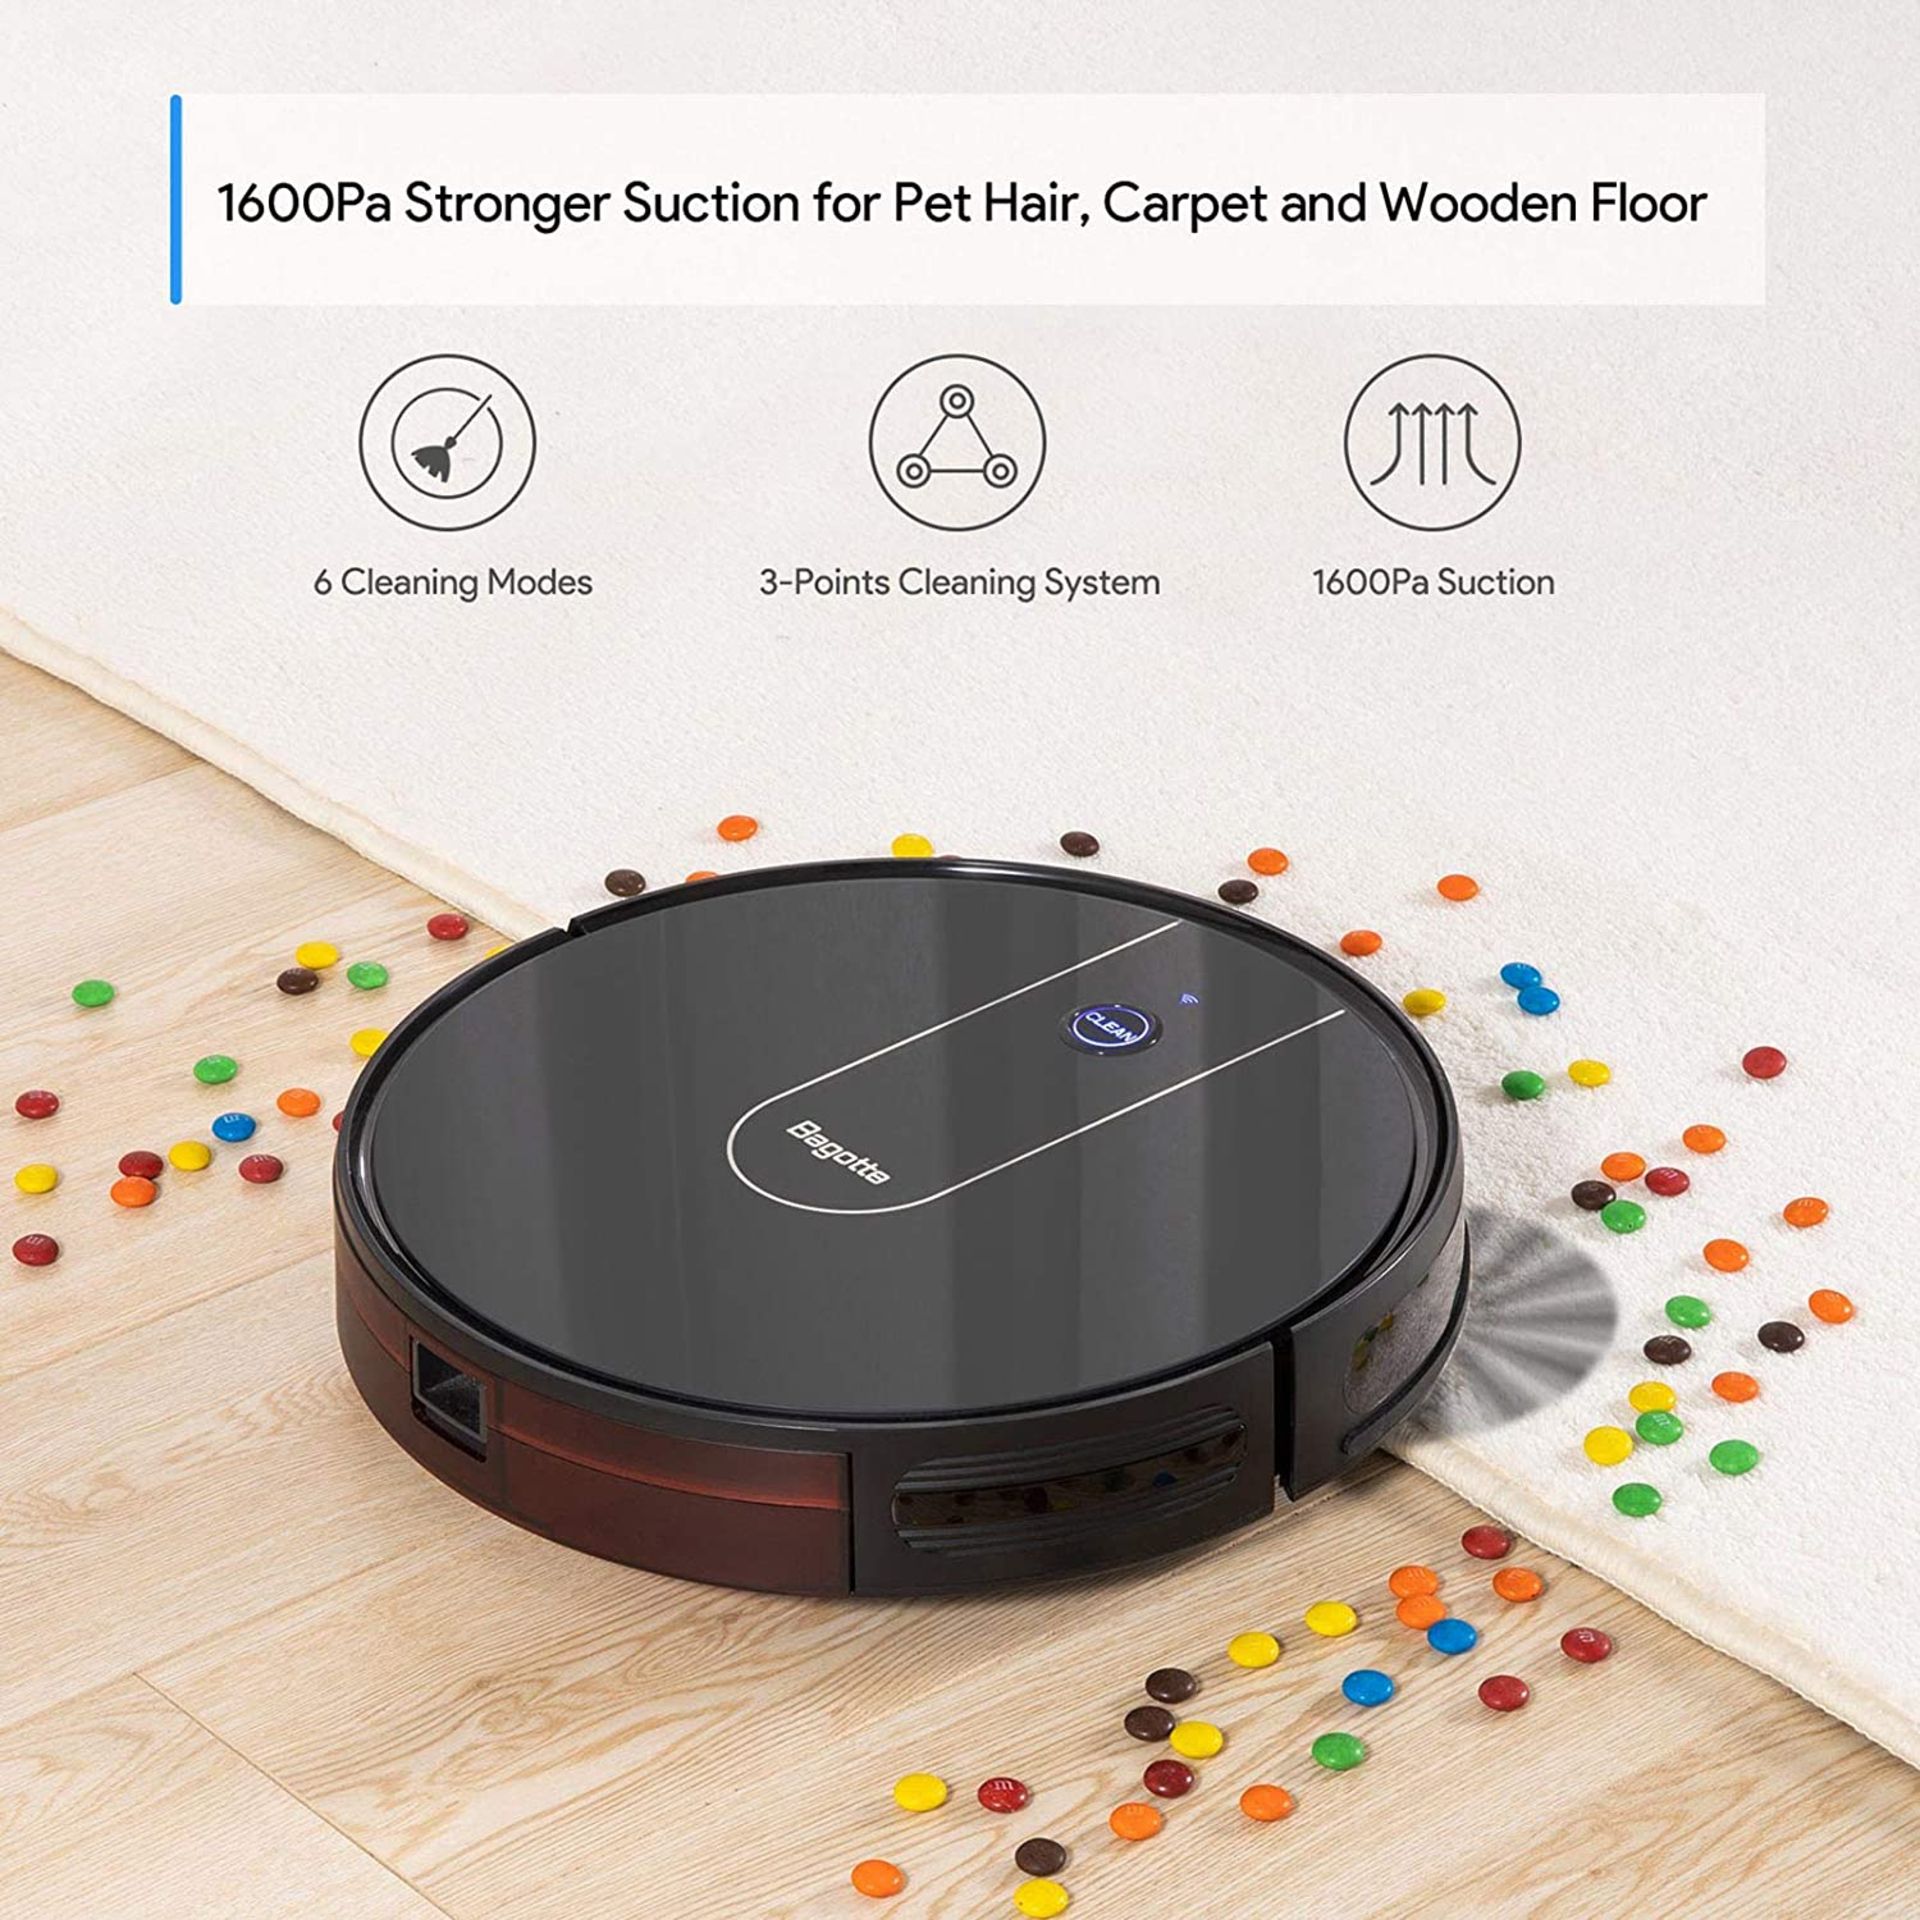 Bagotte BG700 Wi-Fi Robot Vacuum with mop - 2.7" Thin, Strong Suction, Work with Alexa - Bild 5 aus 8